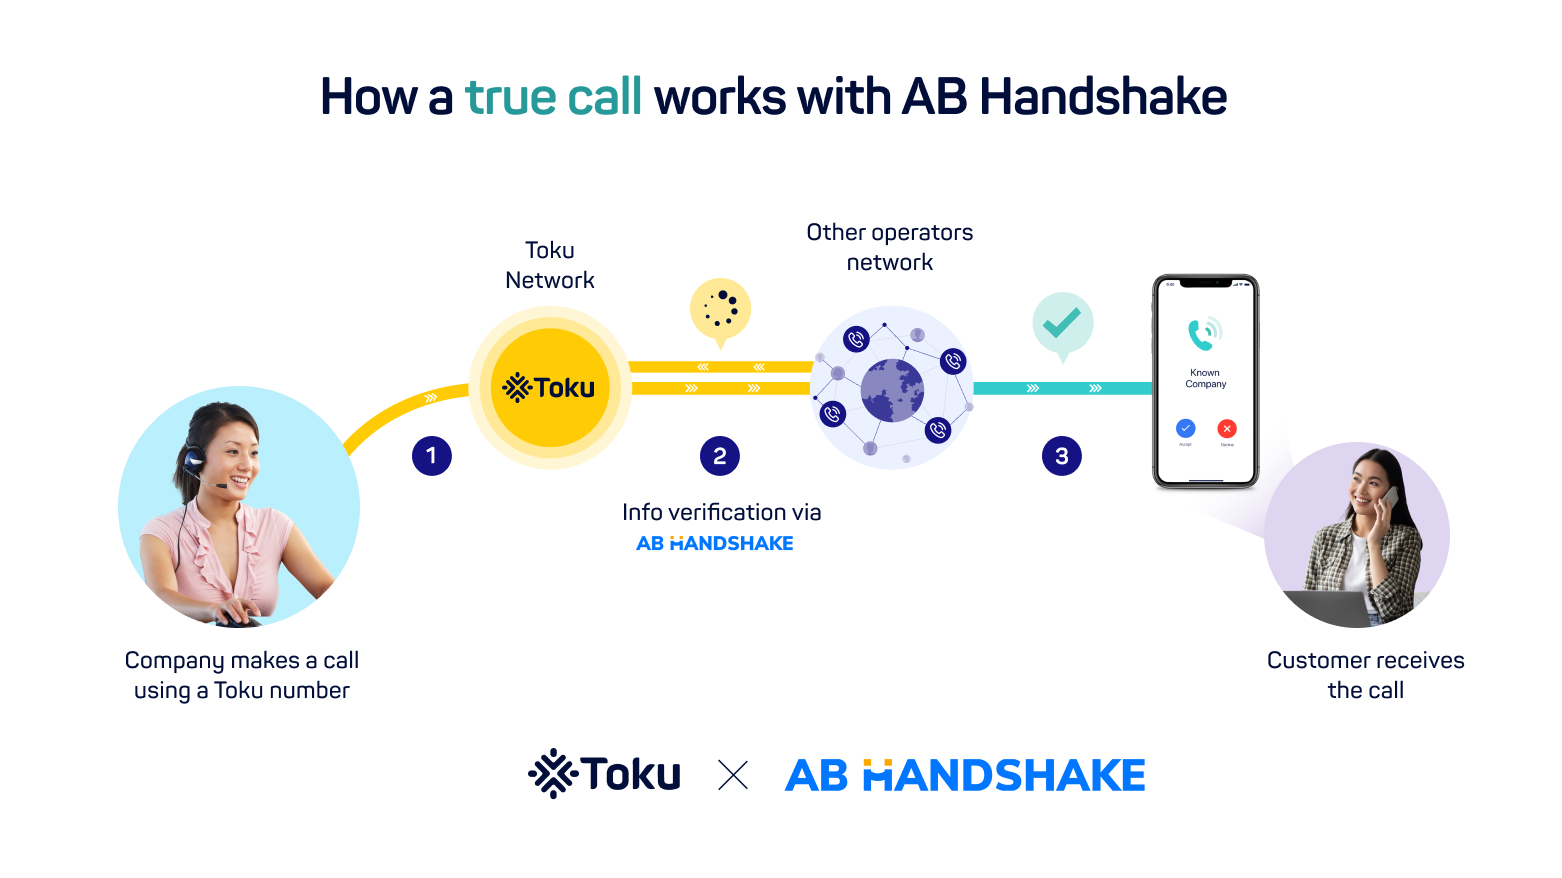 How a true call works with AB Handshake